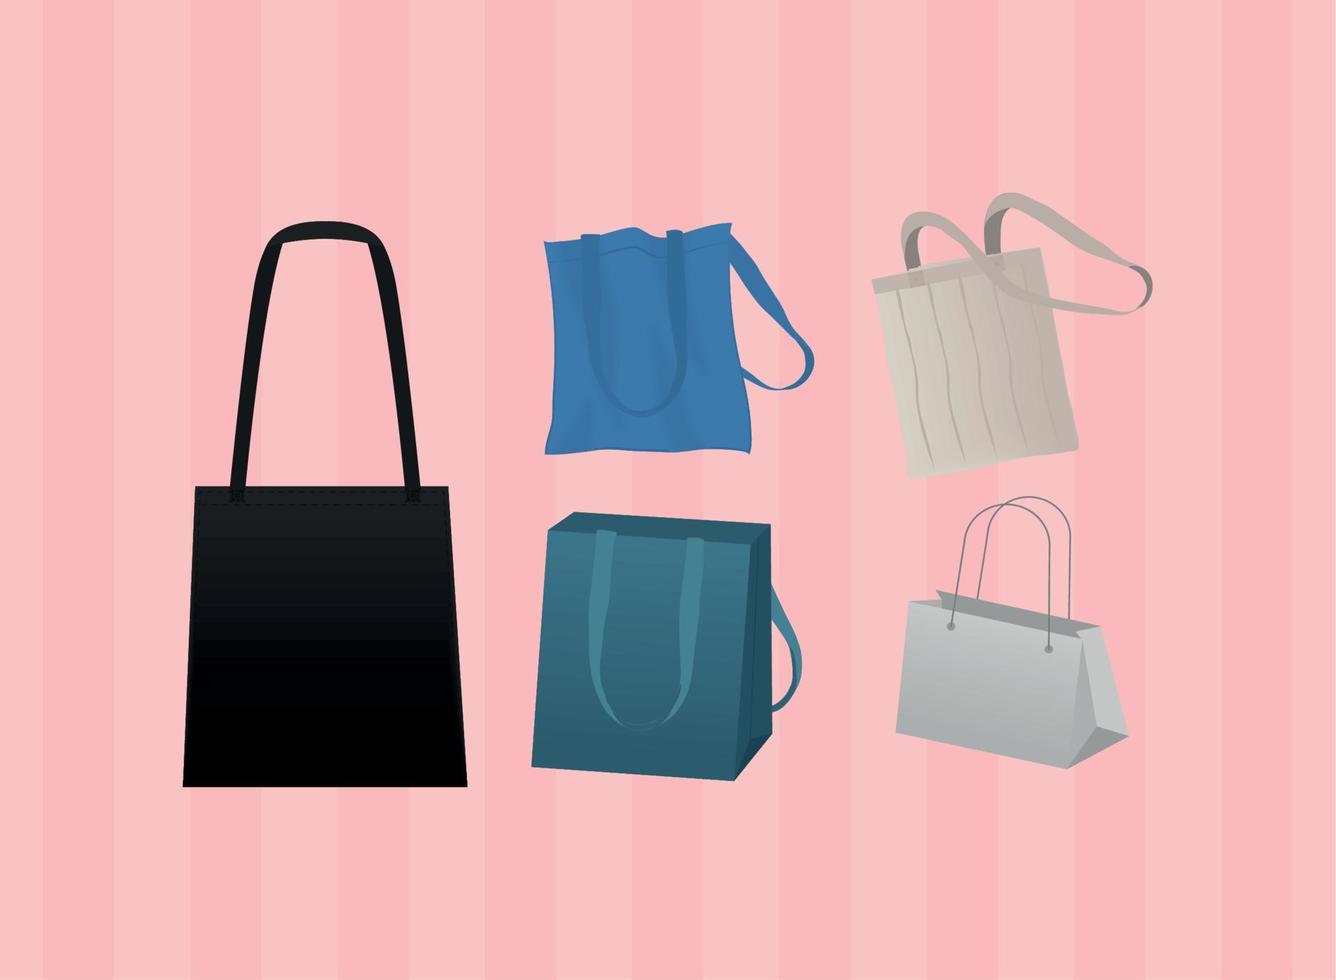 icons shopping bags vector